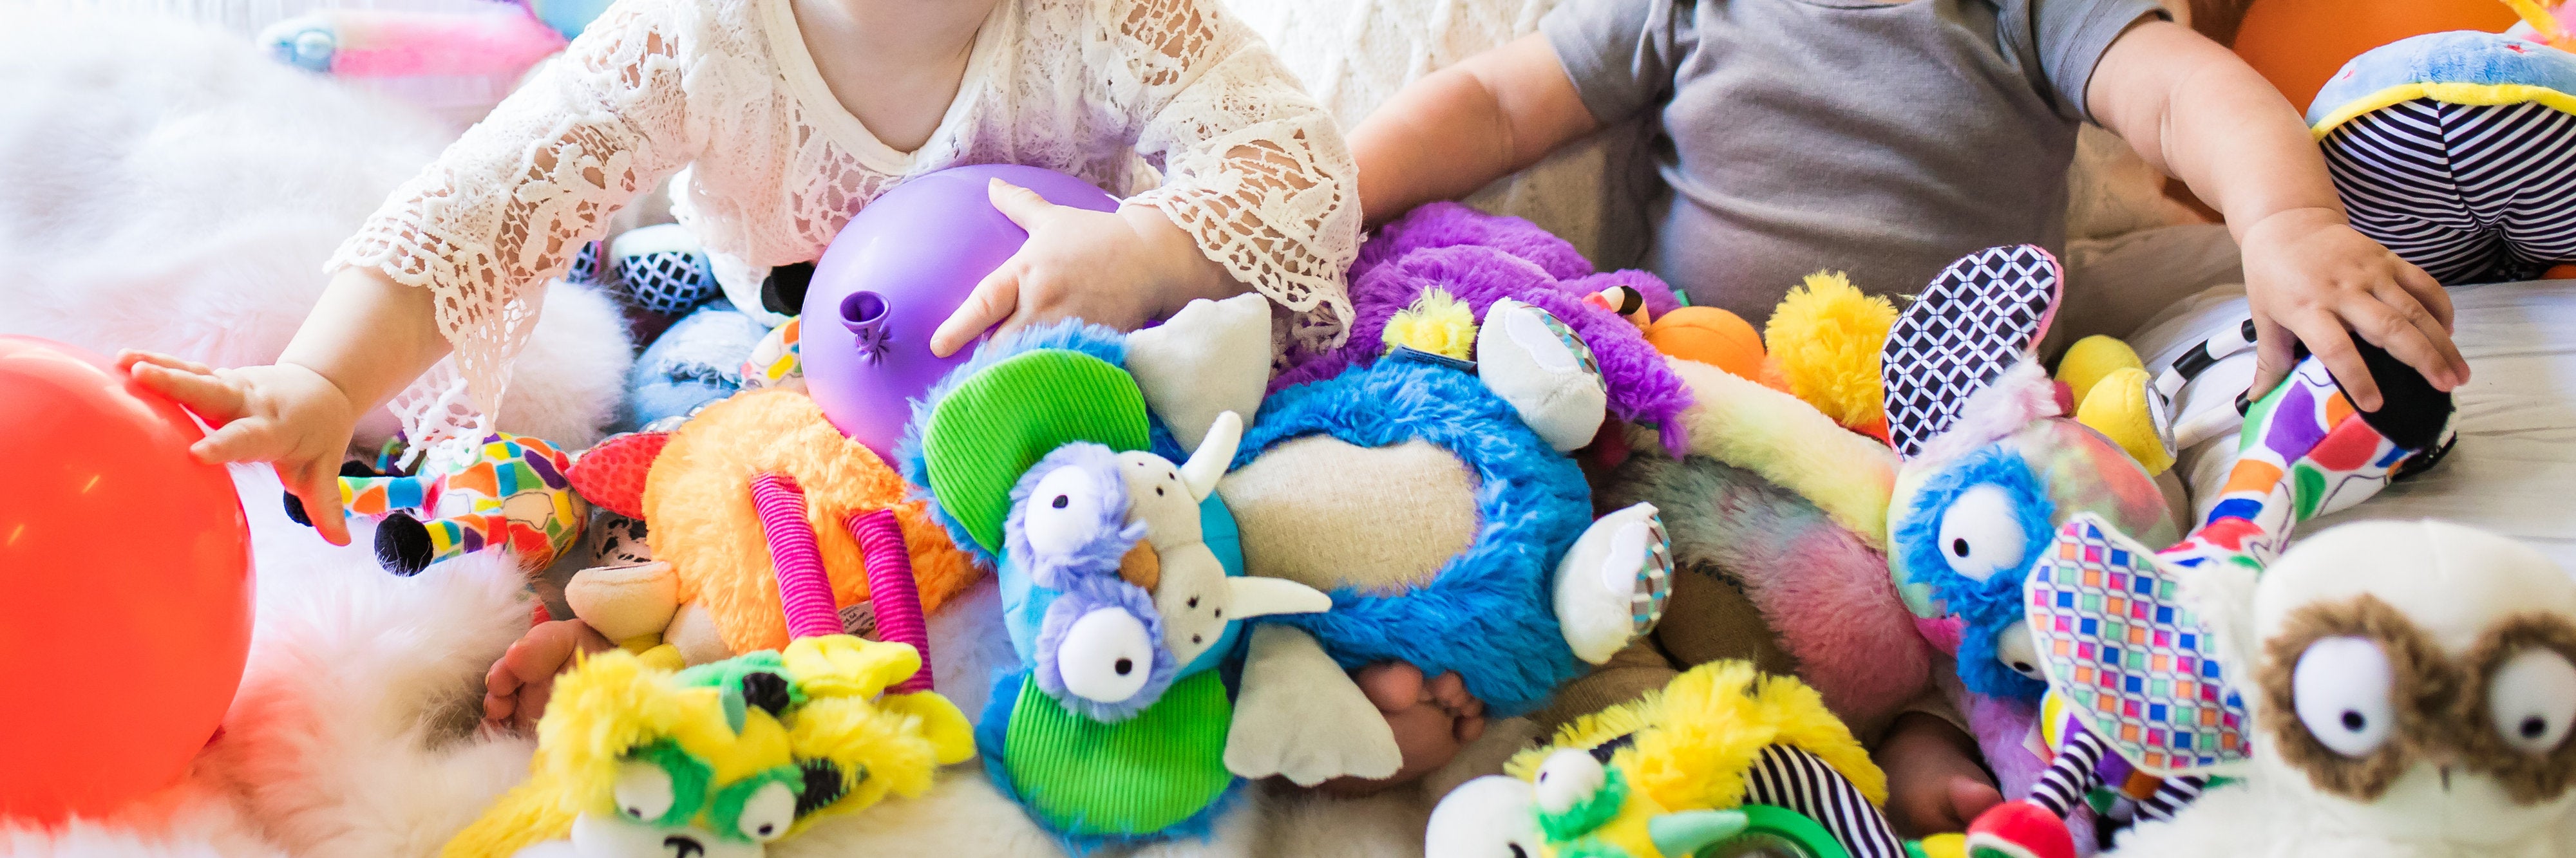 colorful baby toys and toddler and baby hands